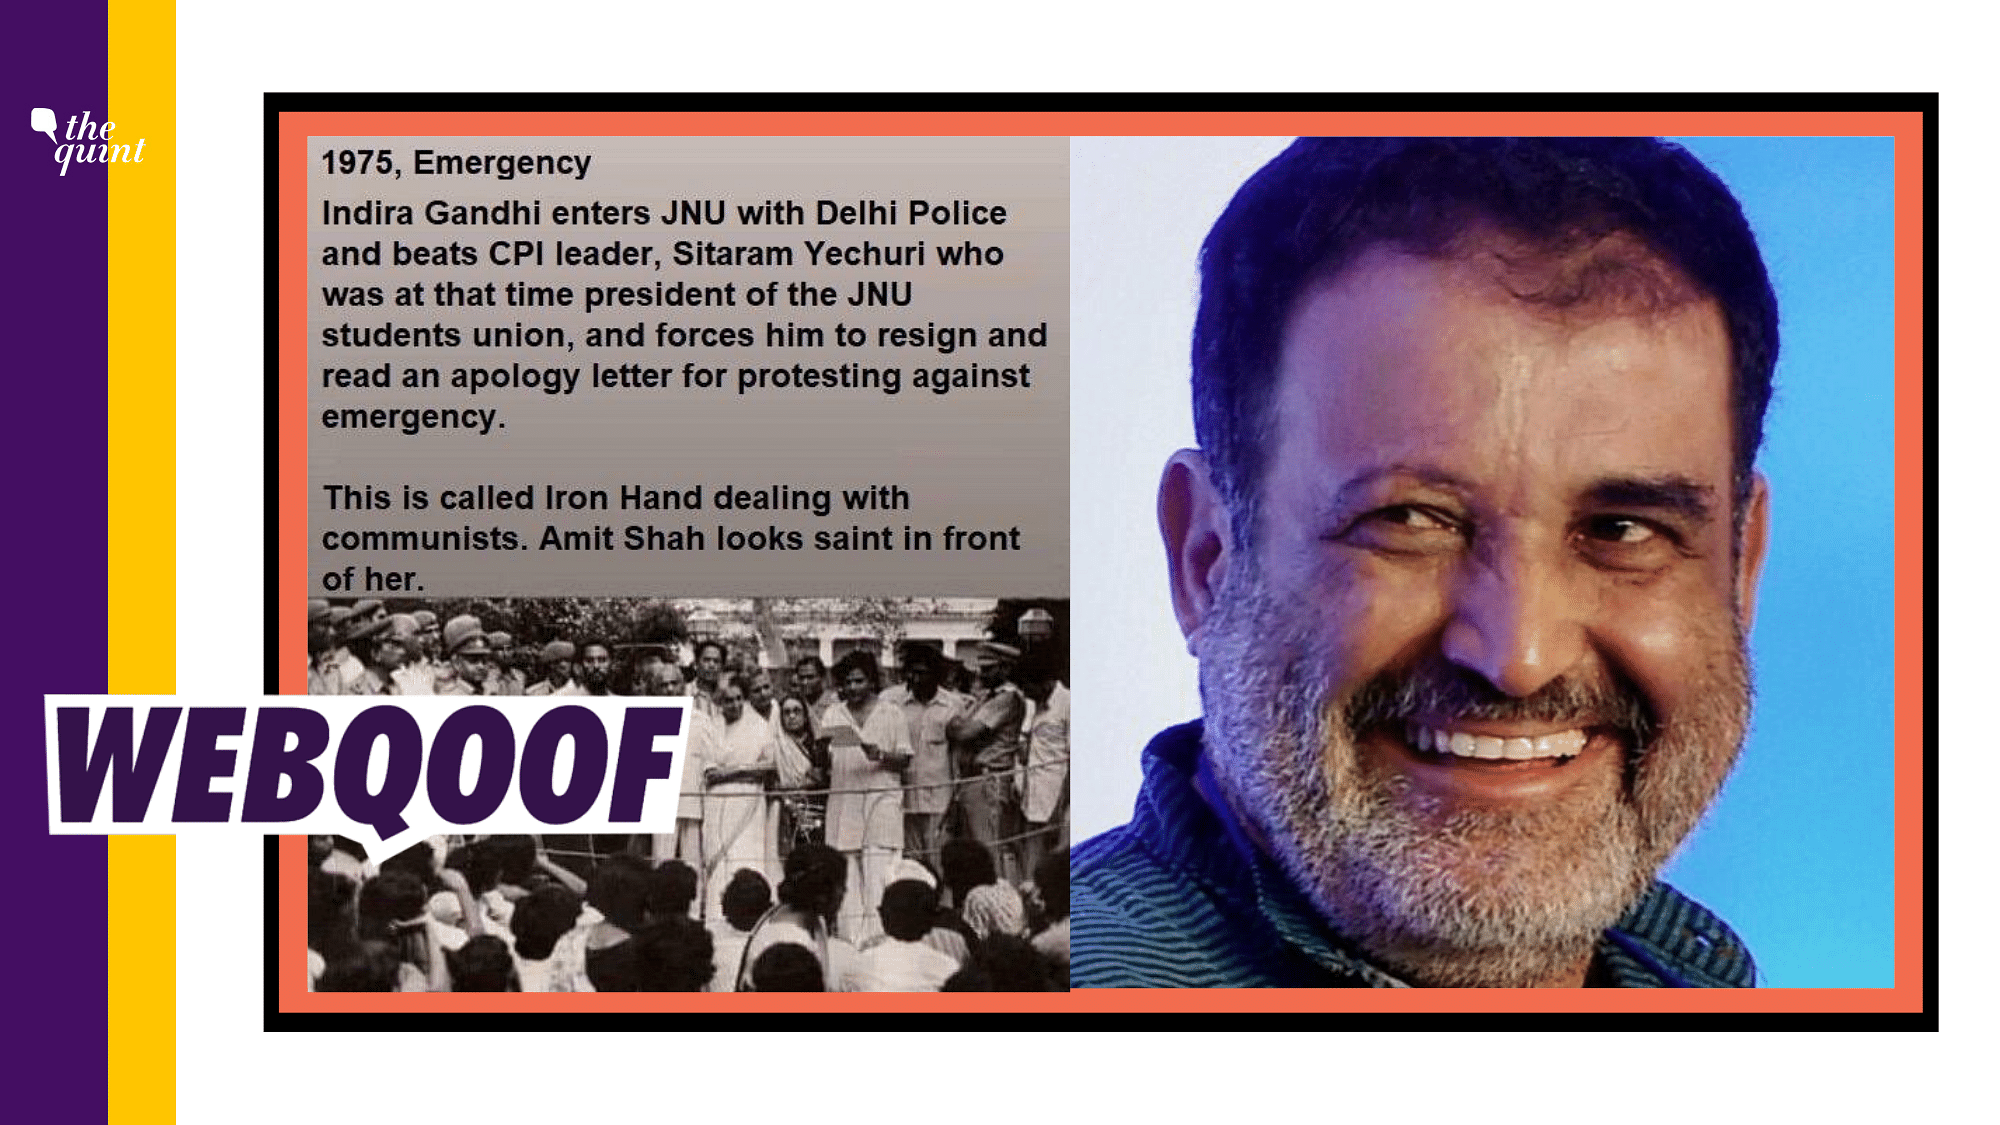 Mohandas Pai shared a photo of Indira Gandhi at JNU which bears a caption claiming that she brought police to JNU and beat up Sitaram Yechury for protesting against the Emergency.